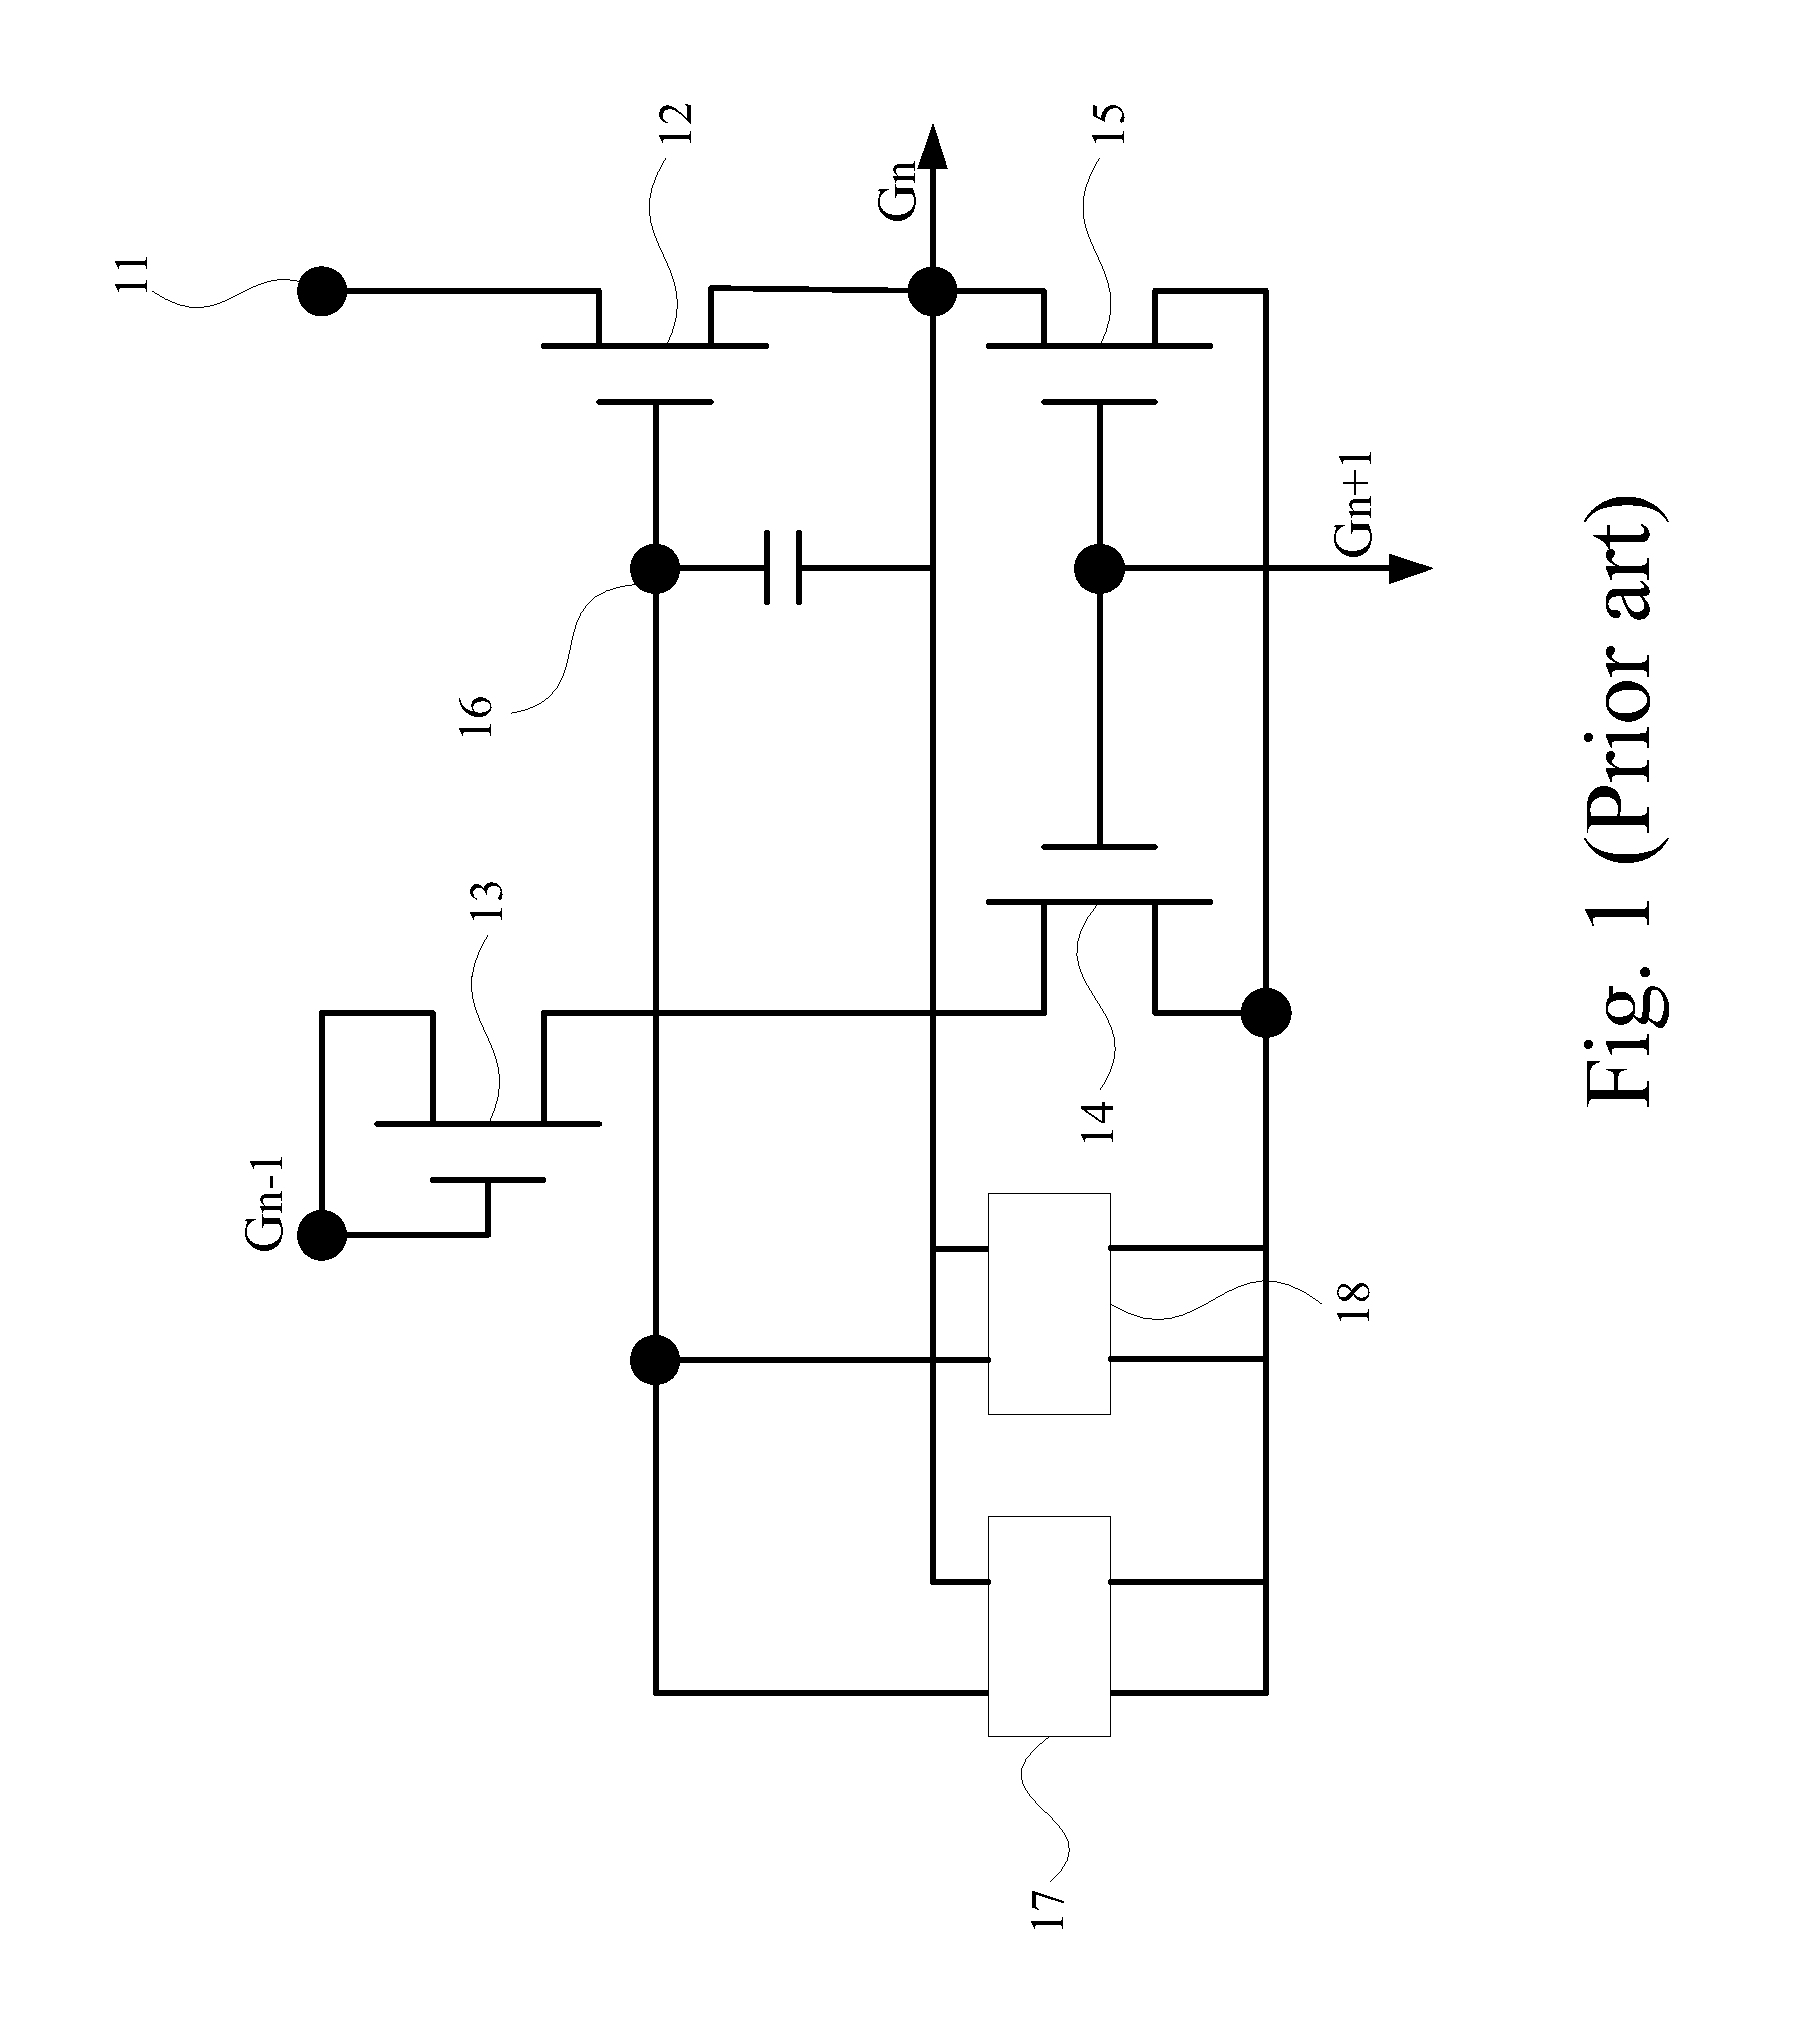 Driving Circuit of a Liquid Crystal Panel and an LCD